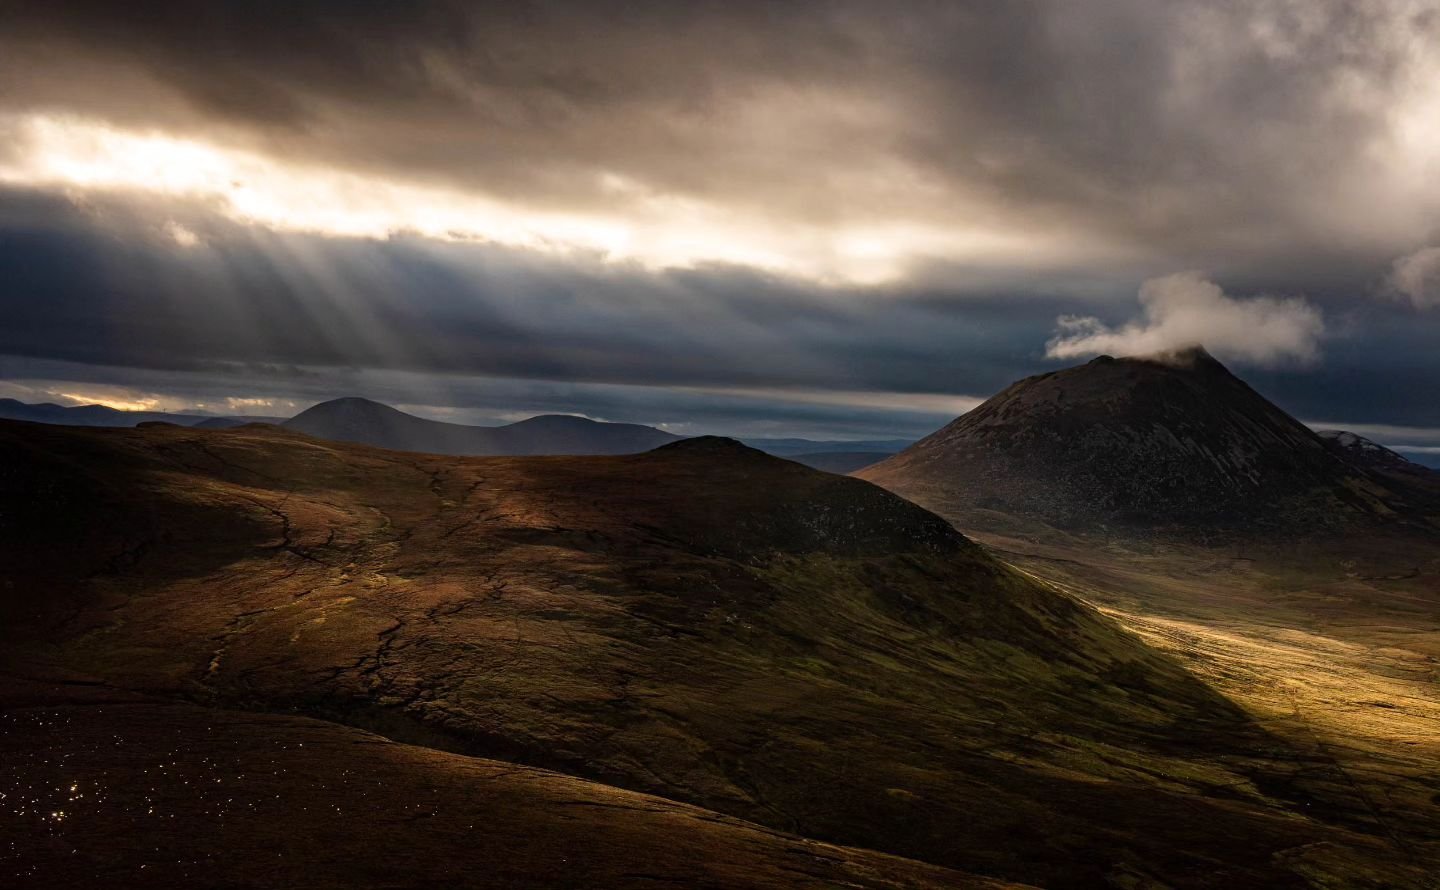 Shards of light high up in remote Caithness with a wispy cloud nestling on Morven, the county's highest peak.  Looking forward to returning to this amazing part of Scotland to shoot landscapes commissioned by @sidhchailleann_art for the Industrial Ca